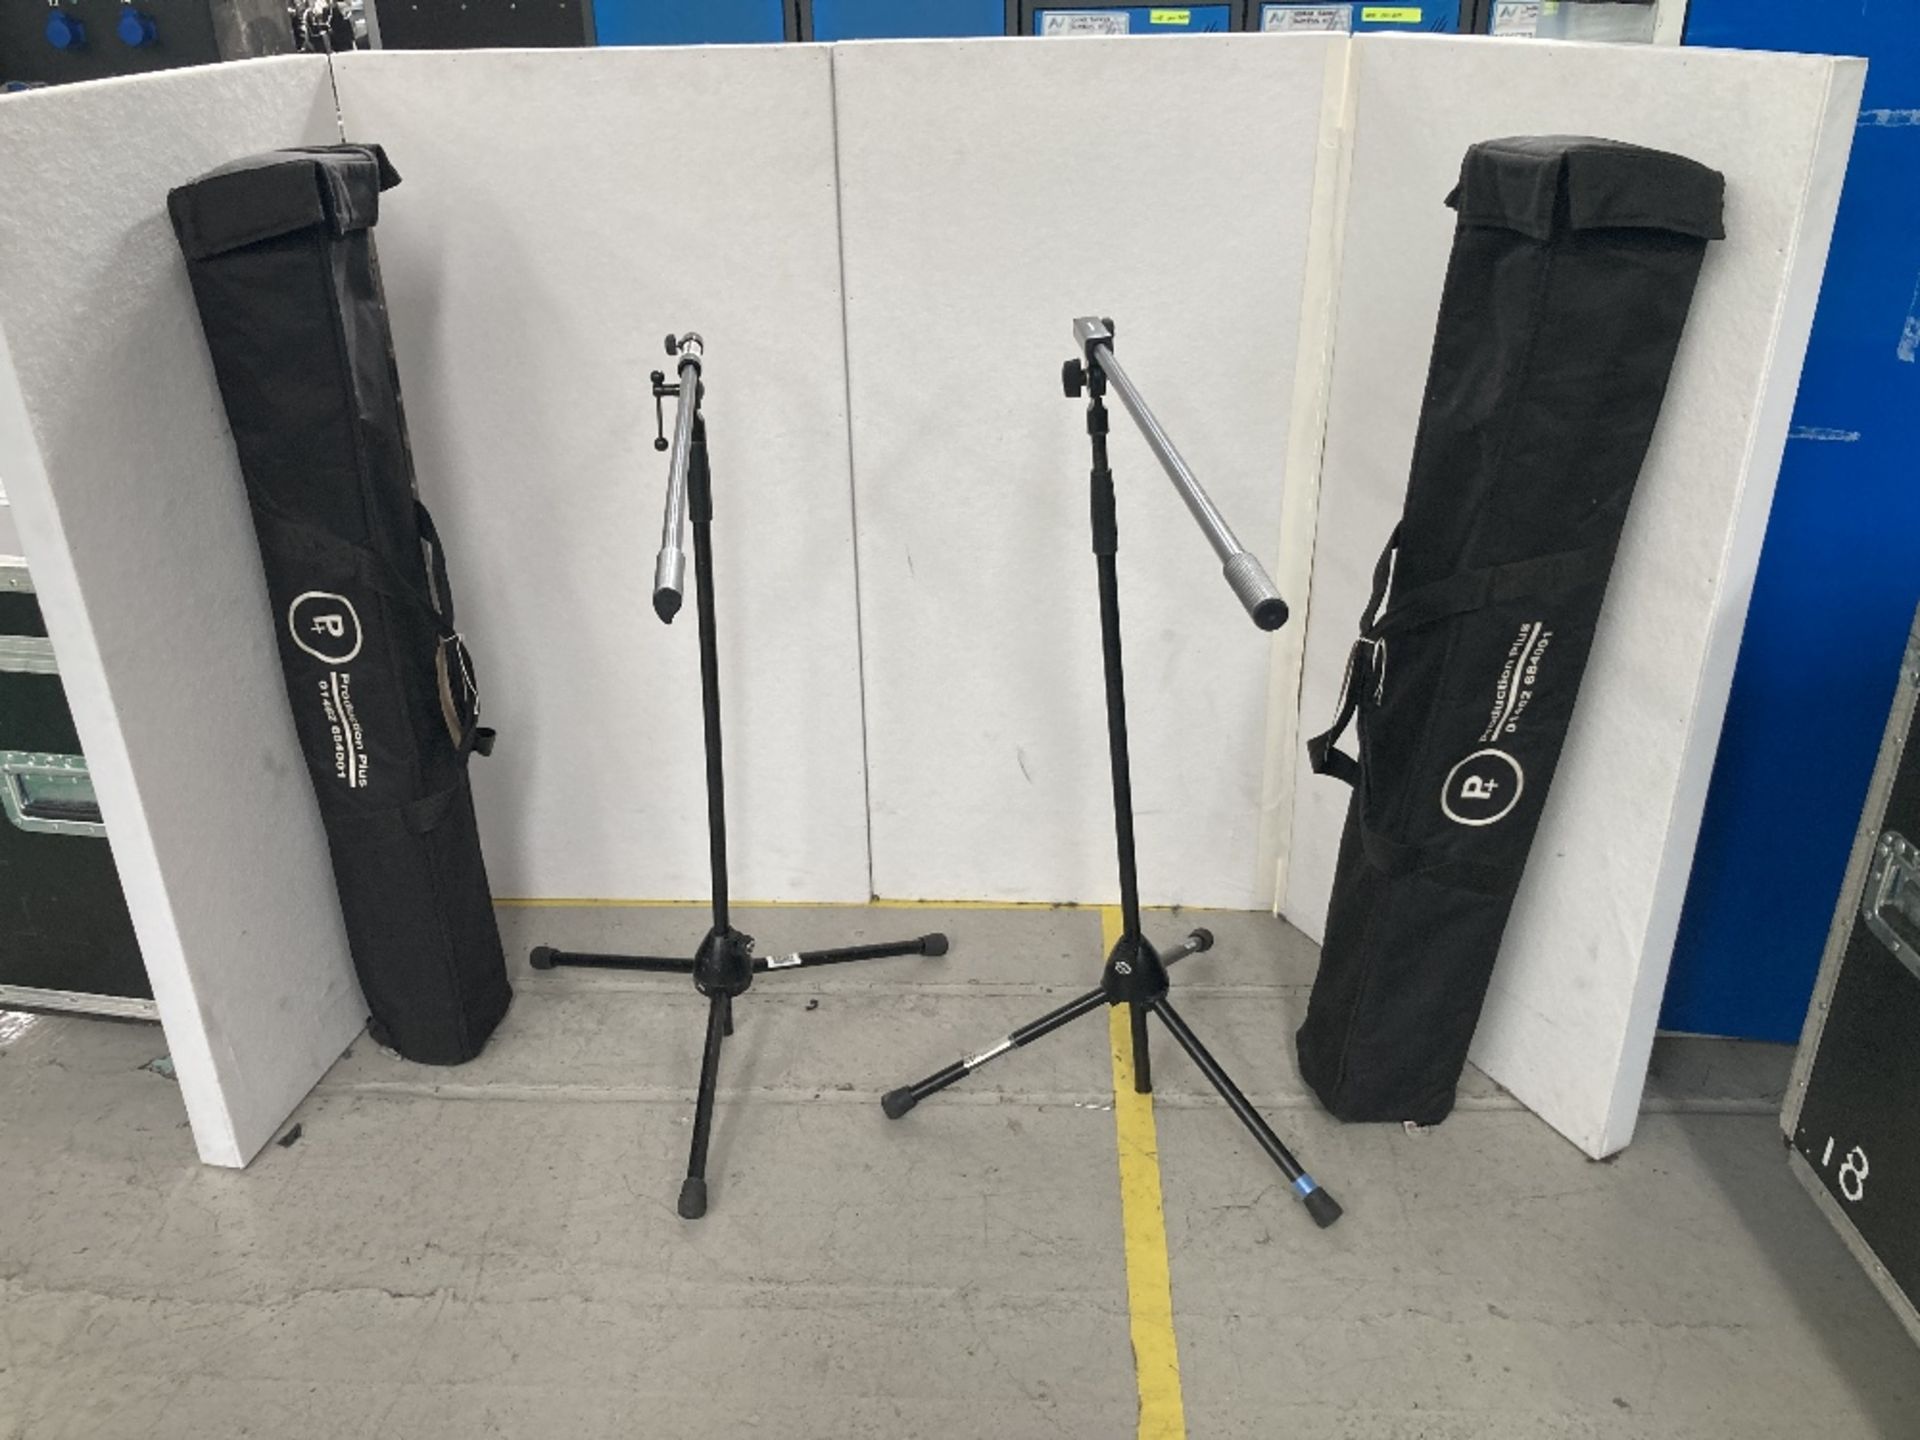 (8) K&M Tall Boom Black Microphone Stands & (2) Padded Carry Case